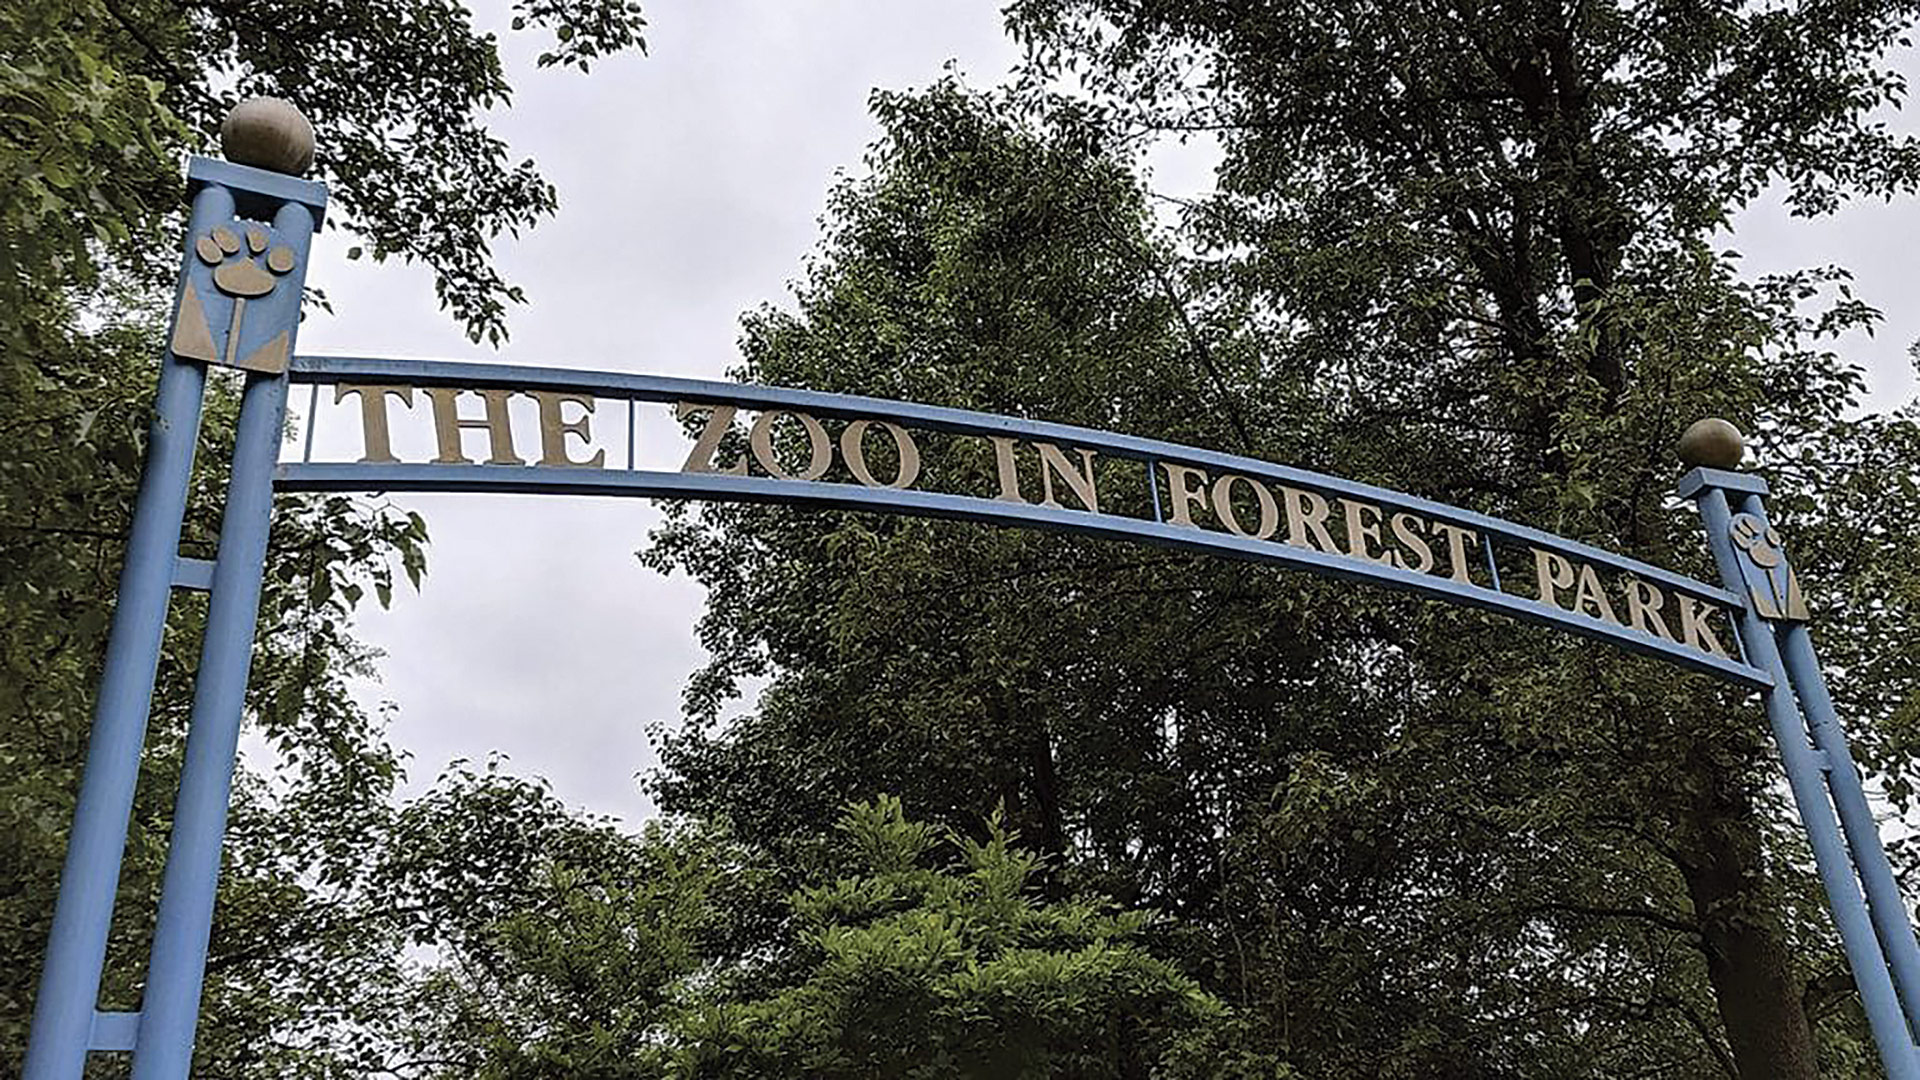 The Zoo in Forest Park